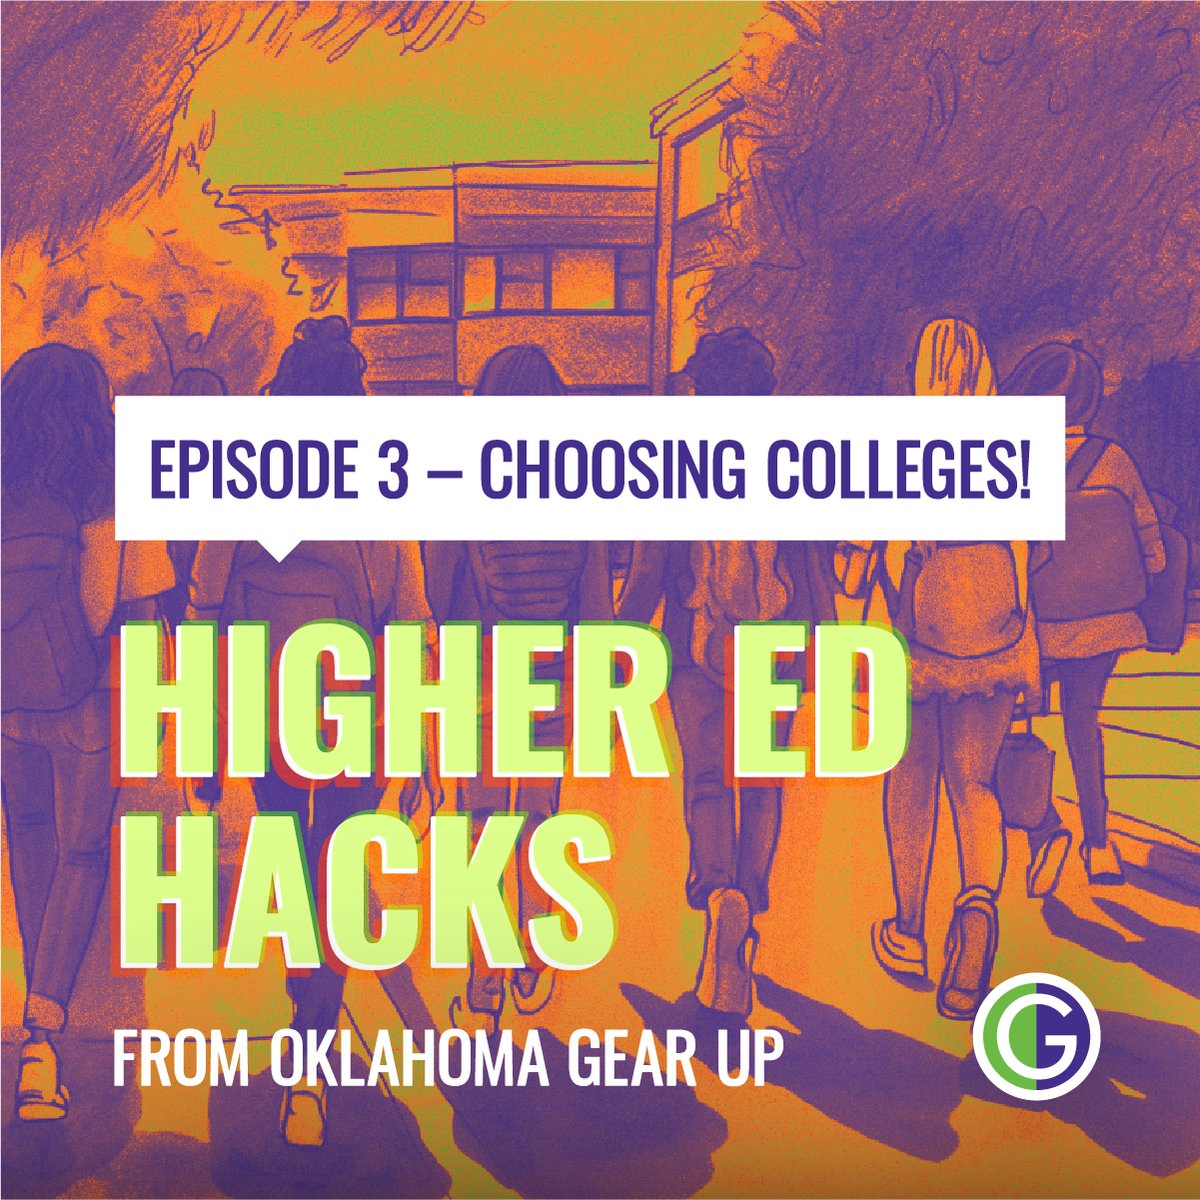 Check out Episode 3 of our podcast for everything you need to consider when choosing a college: bit.ly/3vh9e3P #EmpowerYourFuture